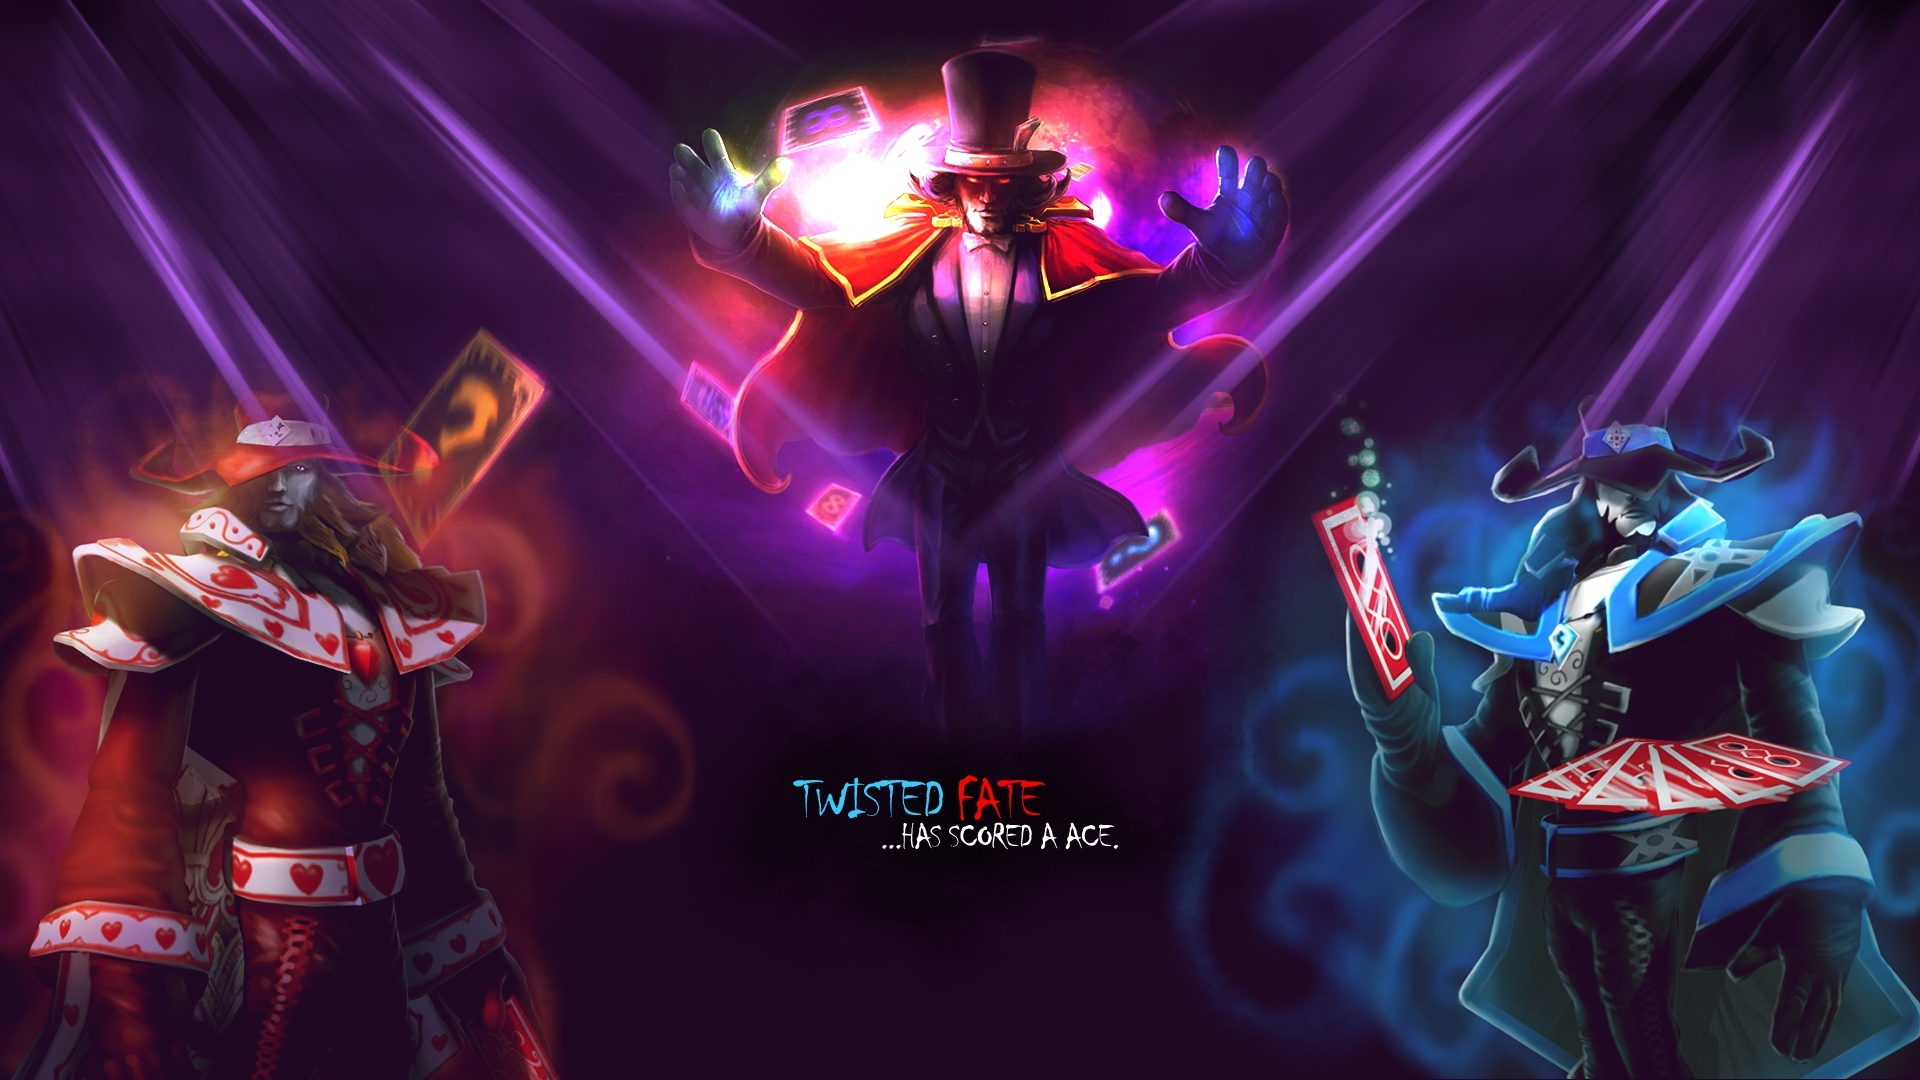  twisted fate 1920x1080 wallpaper Best WallpapersTop Wallpapers 1920x1080